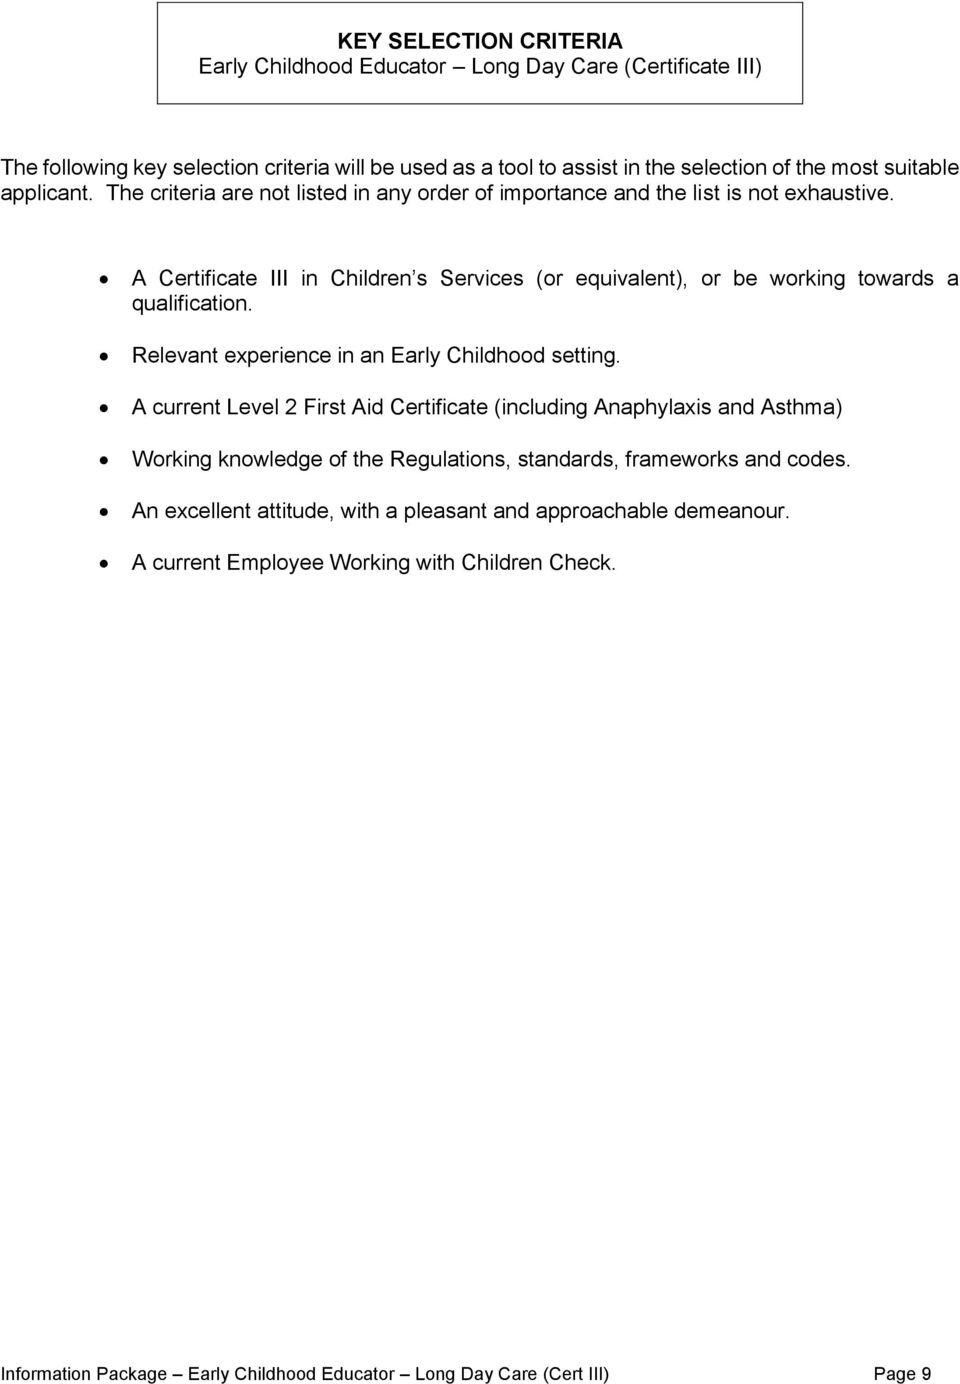 A Certificate III in Children s Services (or equivalent), or be working towards a qualification. Relevant experience in an Early Childhood setting.